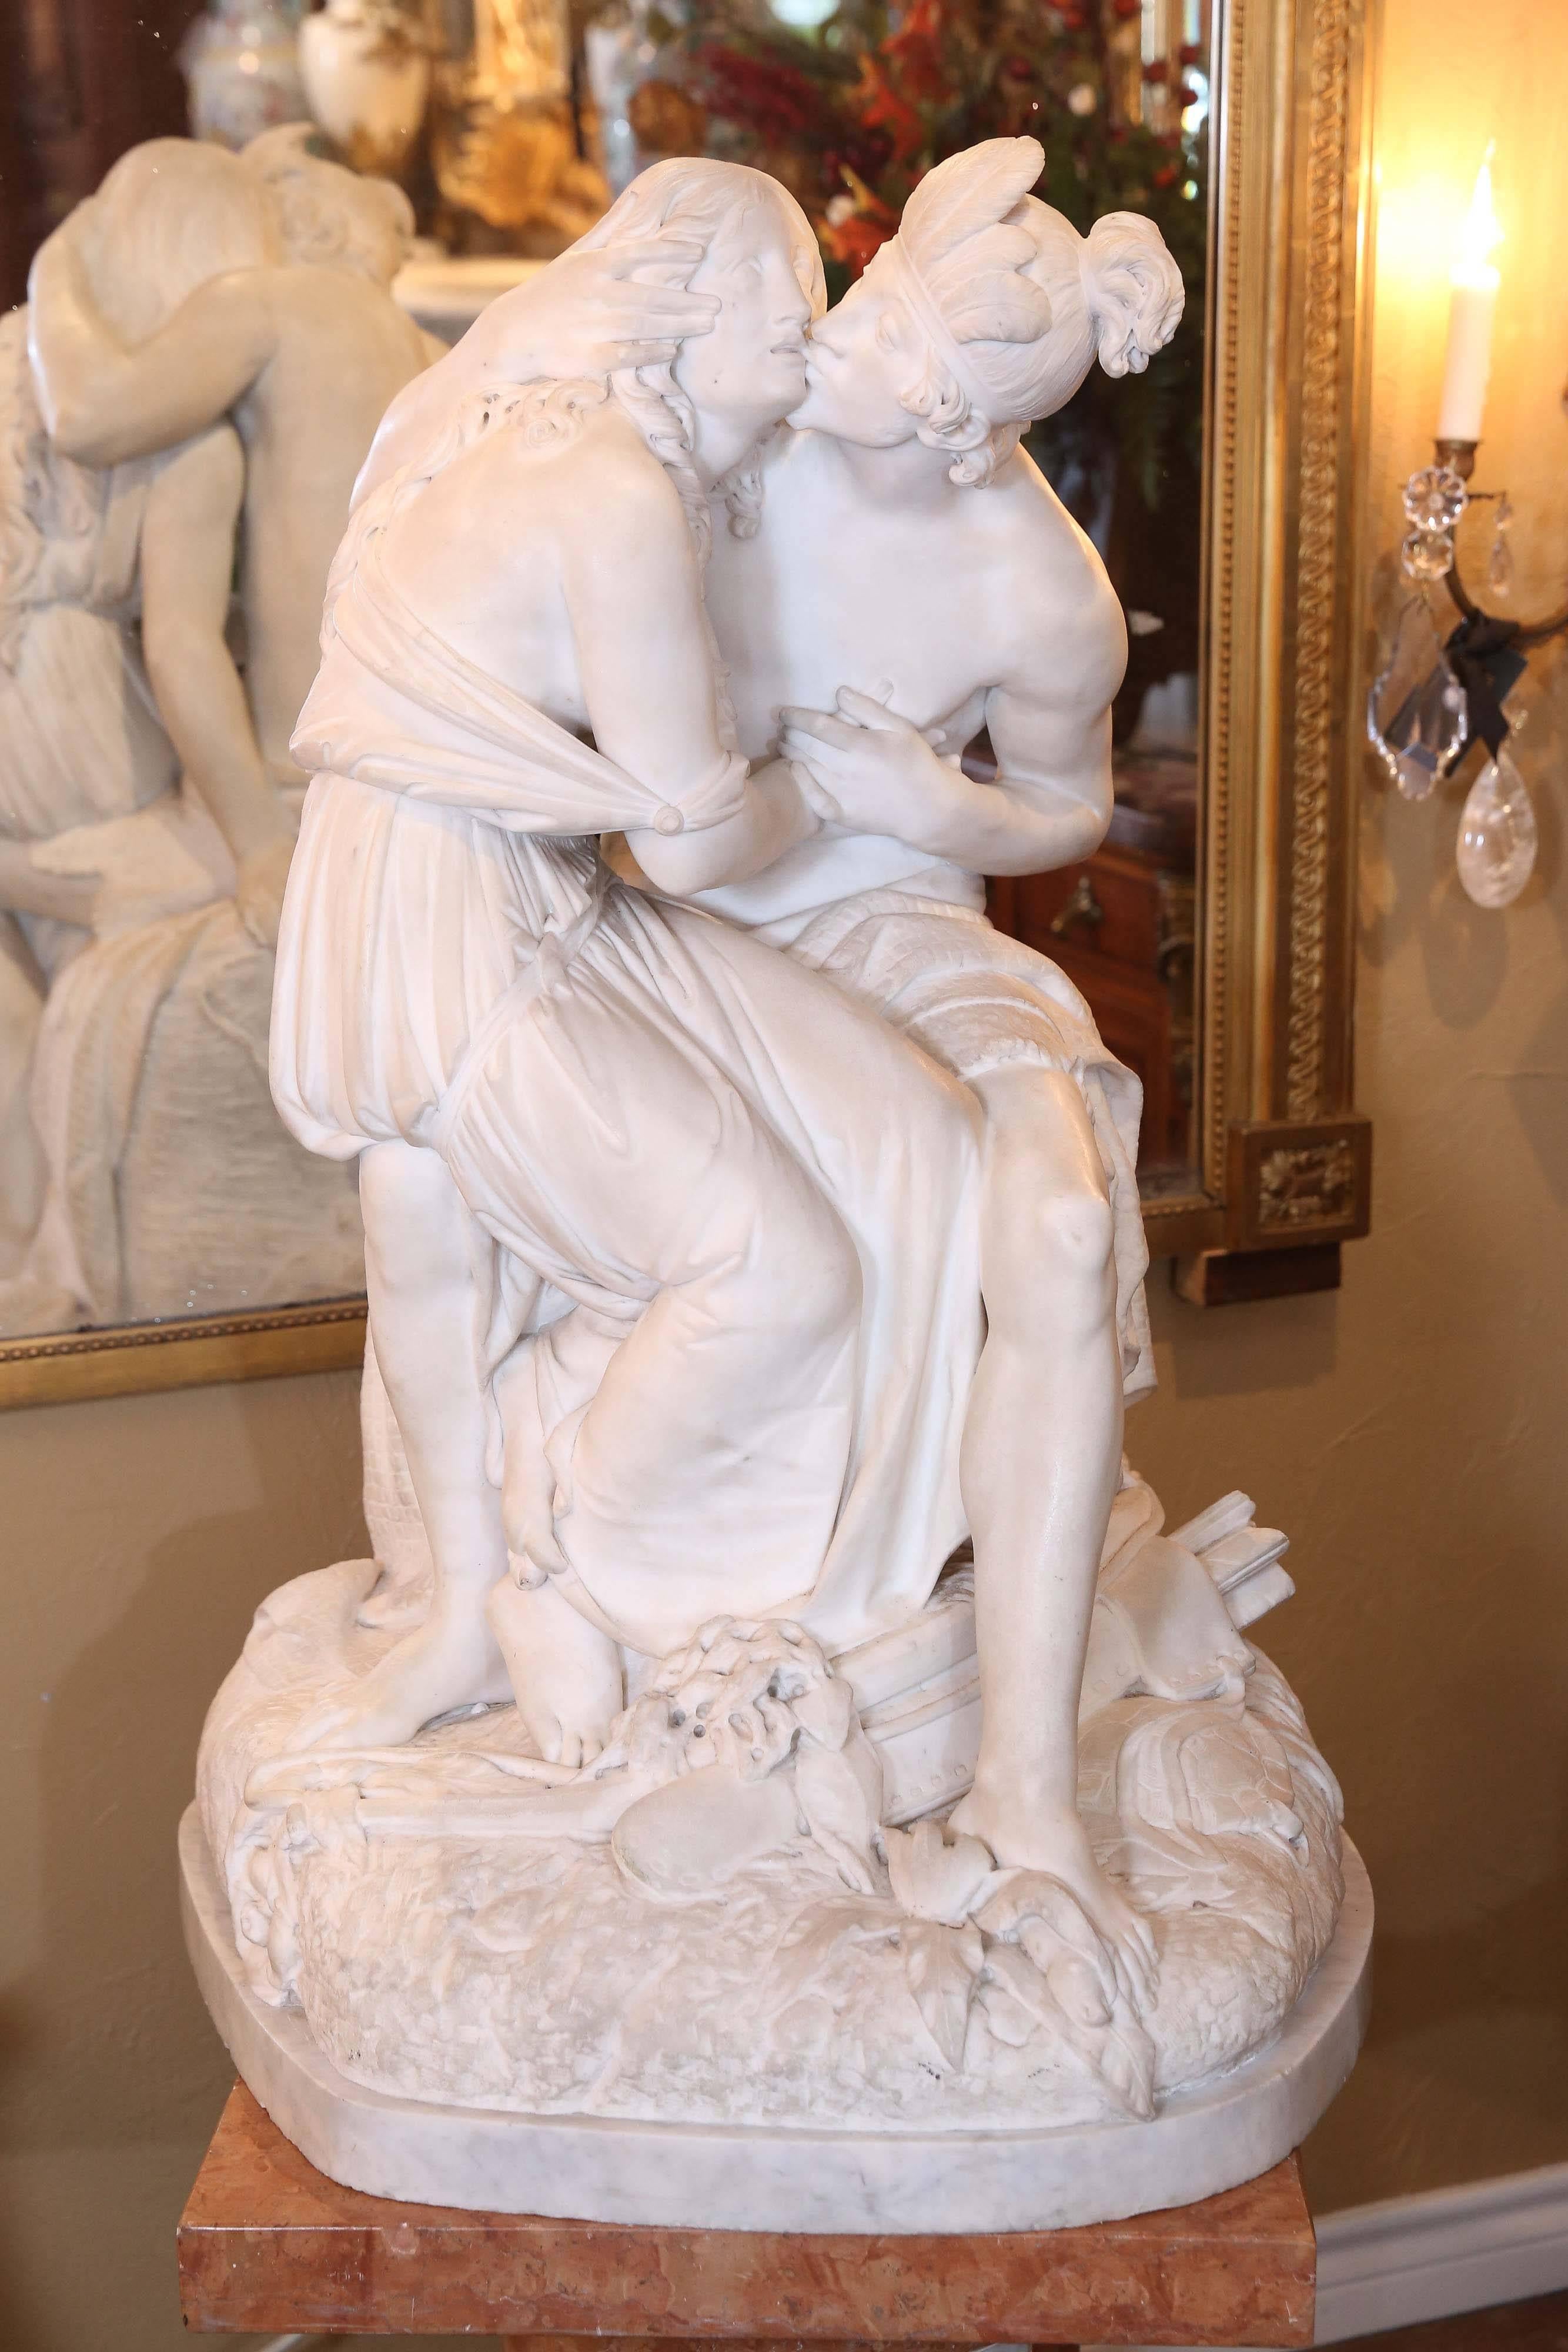 Attributed to Giovanni Turini a sculptor from Verona, Italy 1841-1899.
This sculpture is signed Turini 1867 / Italia .The figures are of two lovers.
Embracing and kissing. Turini was born in Verona Italy and later immigrated
to New York. He is